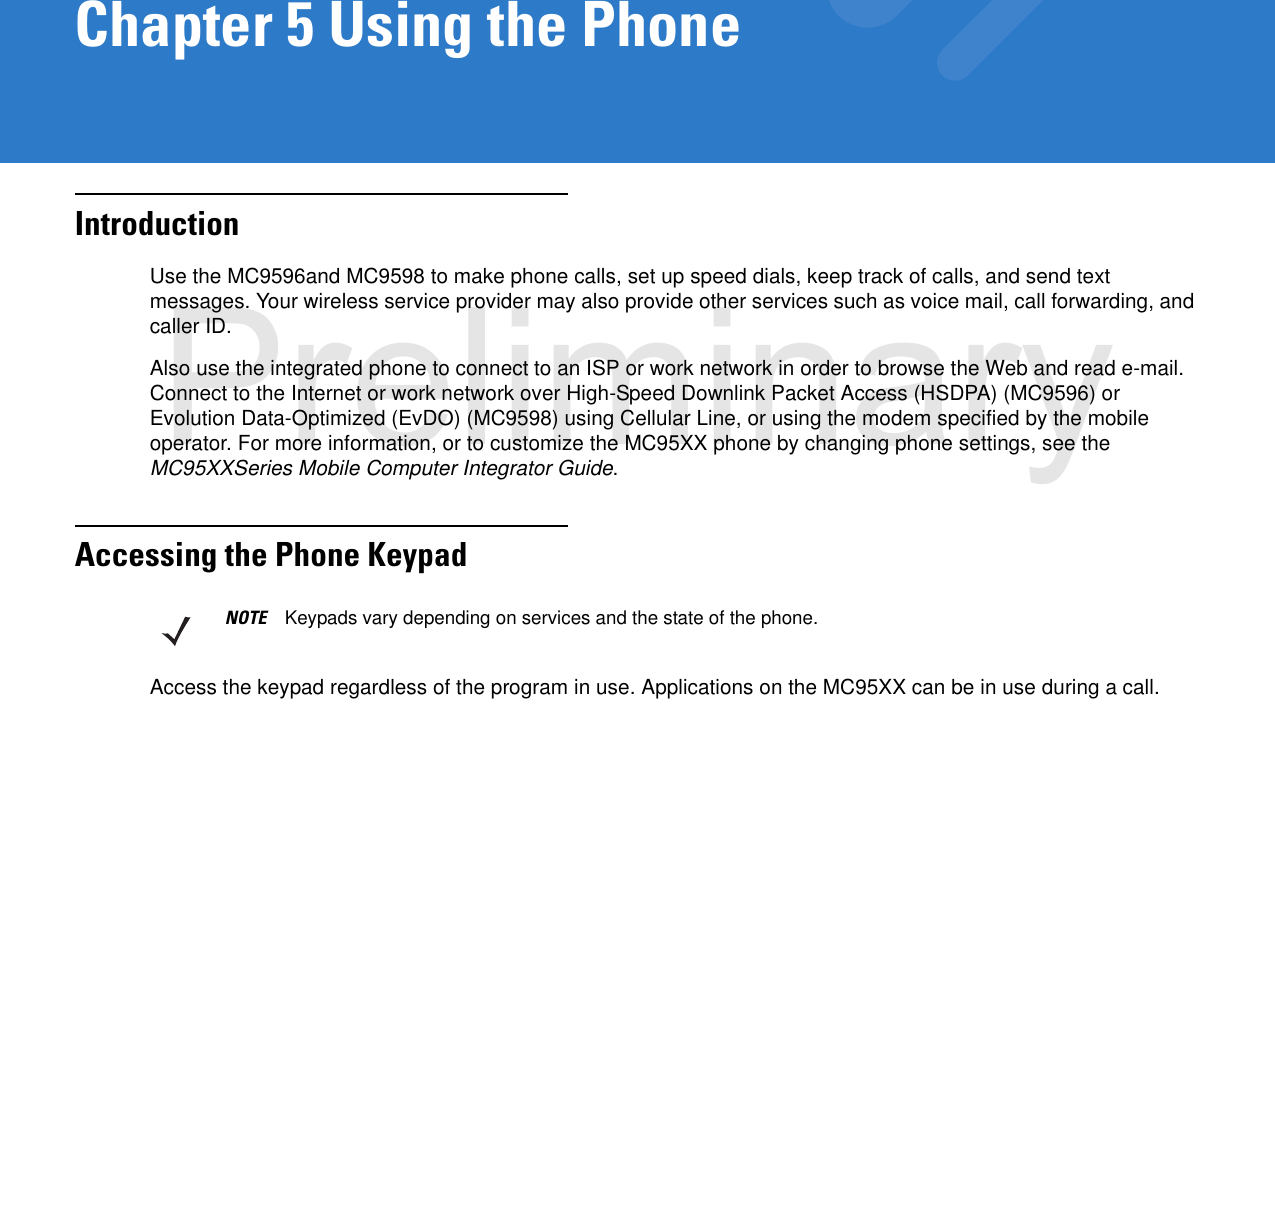 Chapter 5 Using the PhoneIntroductionUse the MC9596and MC9598 to make phone calls, set up speed dials, keep track of calls, and send text messages. Your wireless service provider may also provide other services such as voice mail, call forwarding, and caller ID.Also use the integrated phone to connect to an ISP or work network in order to browse the Web and read e-mail. Connect to the Internet or work network over High-Speed Downlink Packet Access (HSDPA) (MC9596) or Evolution Data-Optimized (EvDO) (MC9598) using Cellular Line, or using the modem specified by the mobile operator. For more information, or to customize the MC95XX phone by changing phone settings, see the MC95XXSeries Mobile Computer Integrator Guide.Accessing the Phone KeypadAccess the keypad regardless of the program in use. Applications on the MC95XX can be in use during a call.NOTE Keypads vary depending on services and the state of the phone.Preliminary